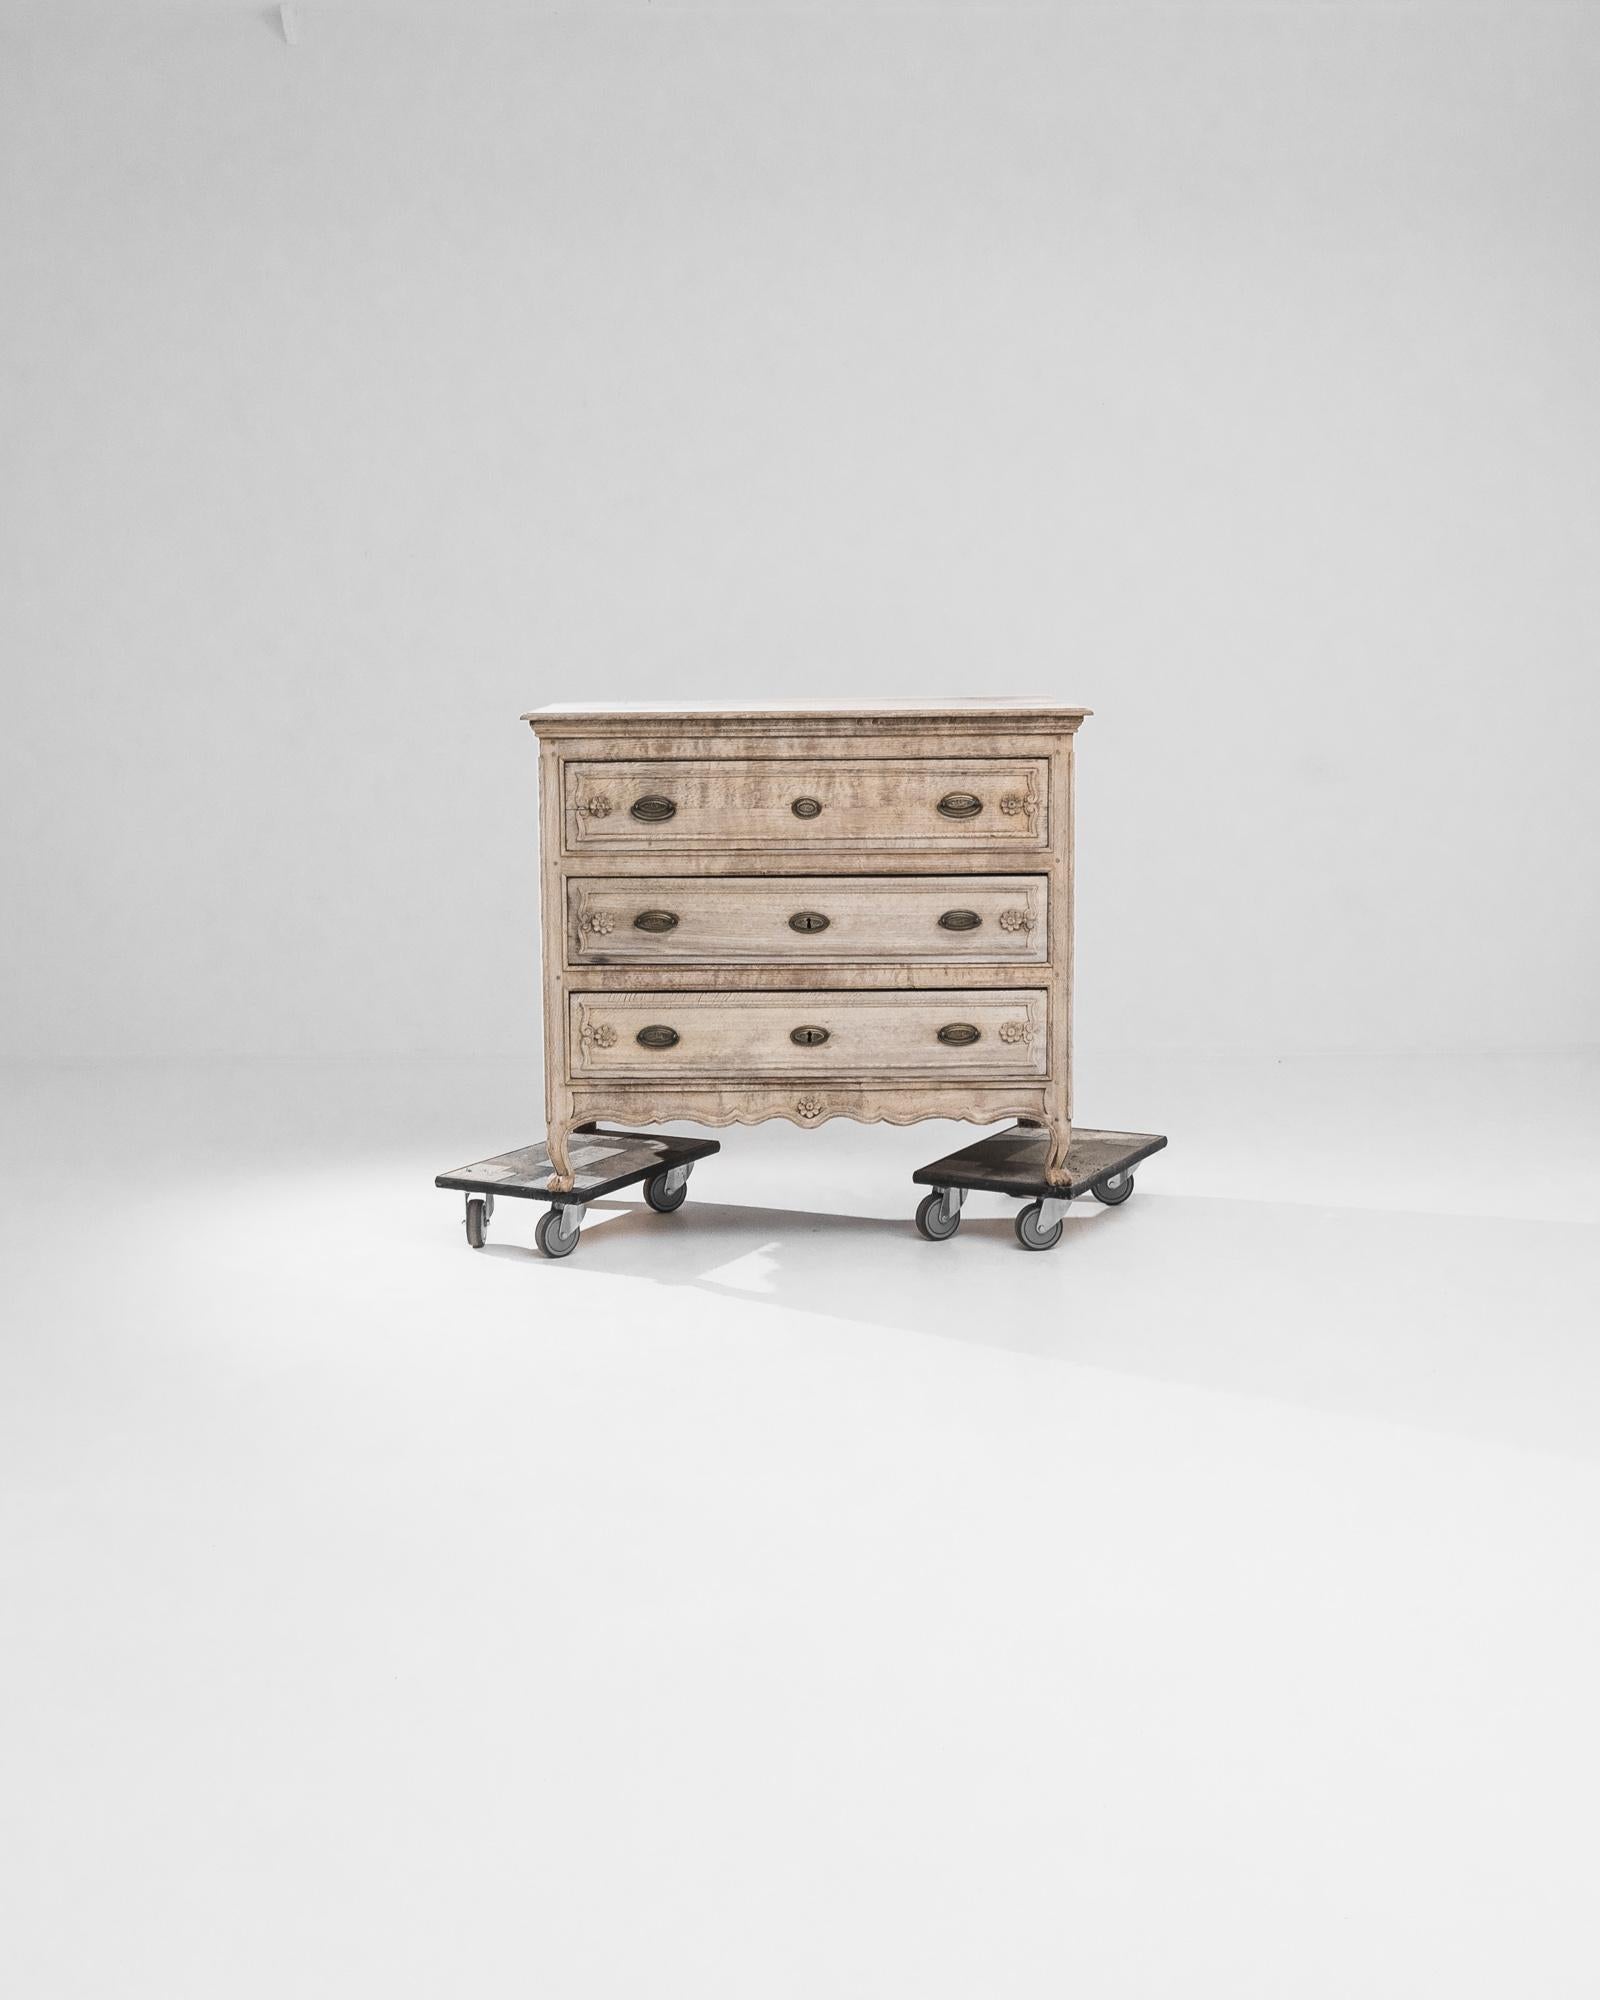 This elegant three-drawer chest features graceful cabriole legs adorned with meticulously carved accents that continue onto the scalloped apron. Created in France during the 20th century, this dresser was handcrafted from oak that has been